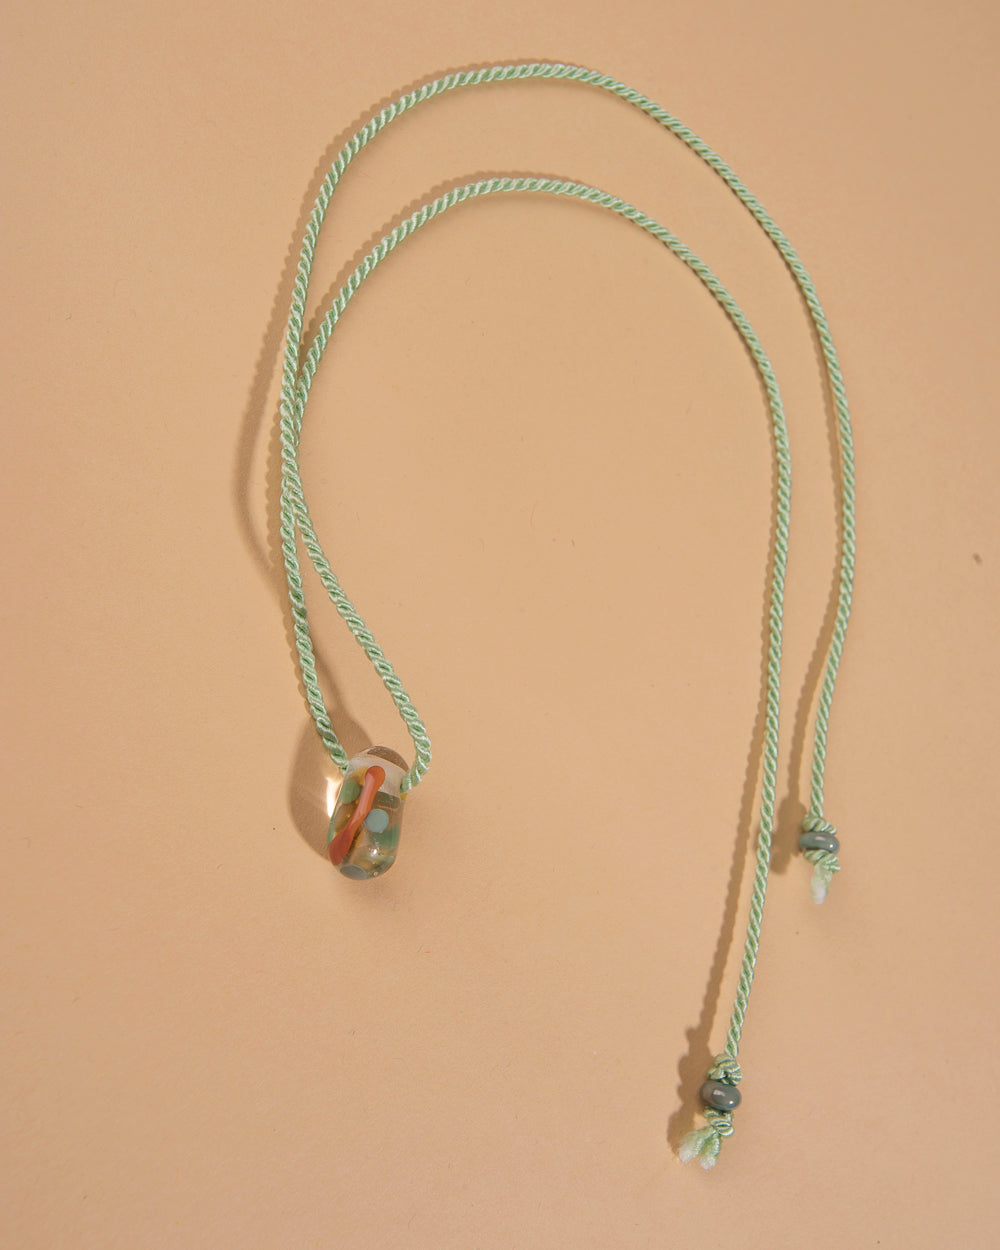 Glass Bead and Rope Necklace – Seafoam Multi Drop